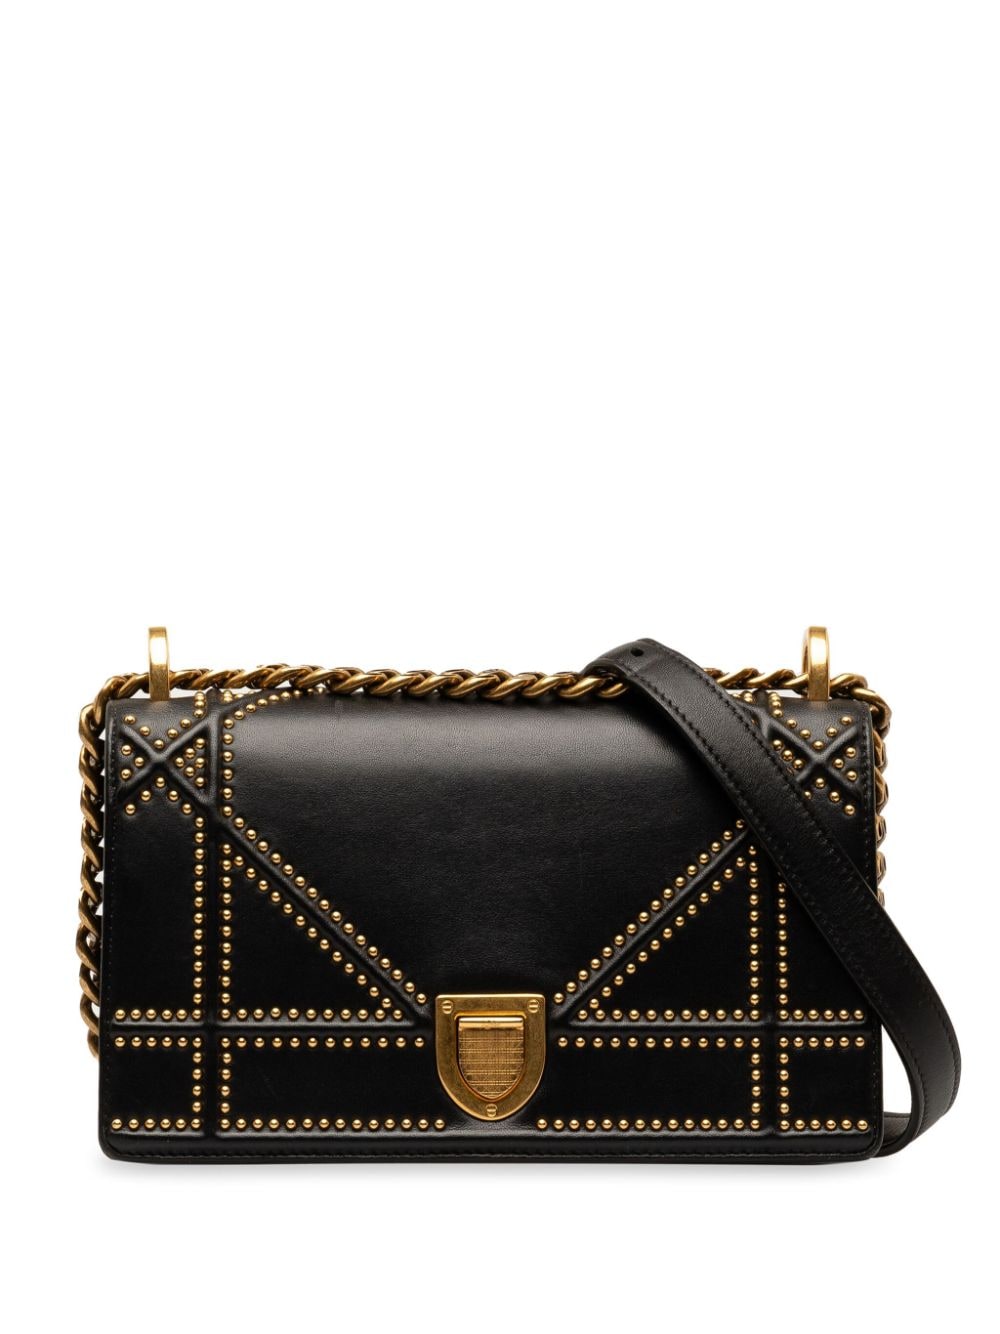 Pre-owned Dior 2018 Small Studded Ama Crossbody Bag In Black